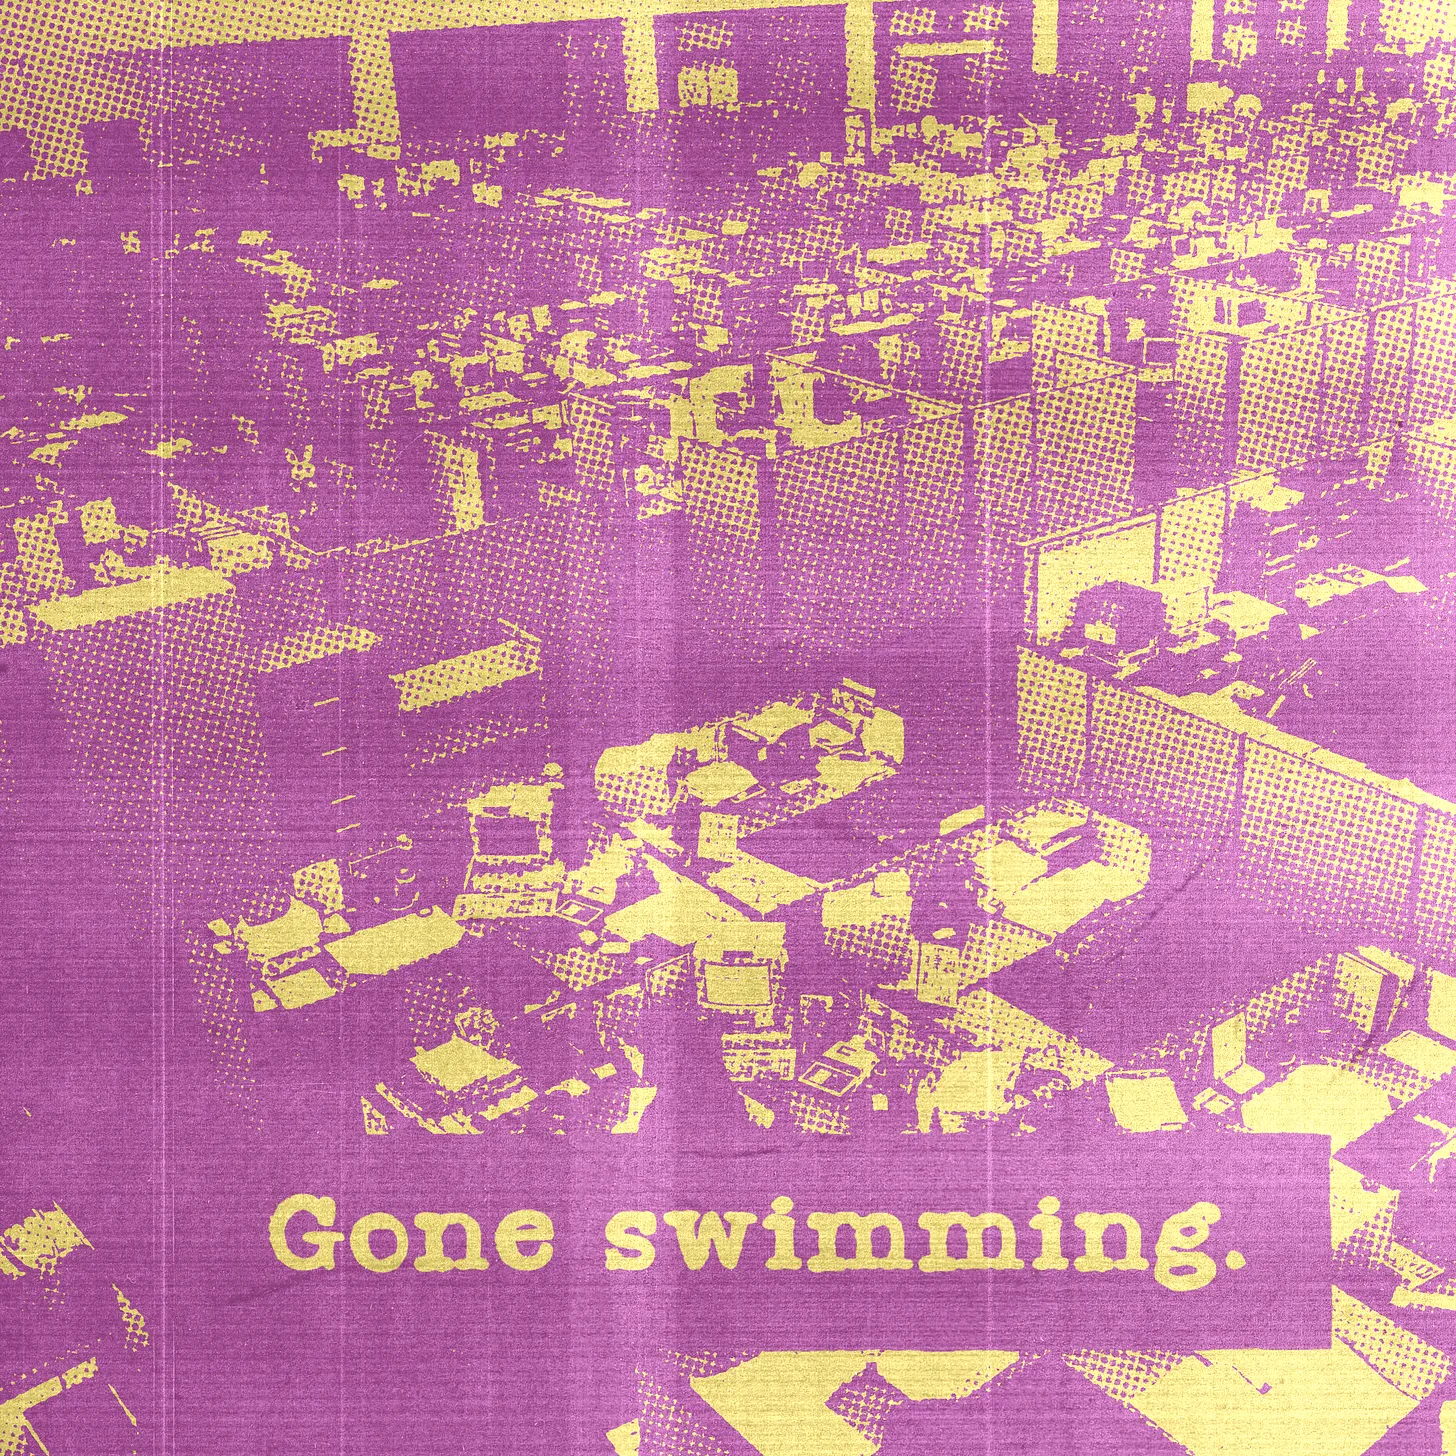 Empty office with overlay that says, "gone swimming."